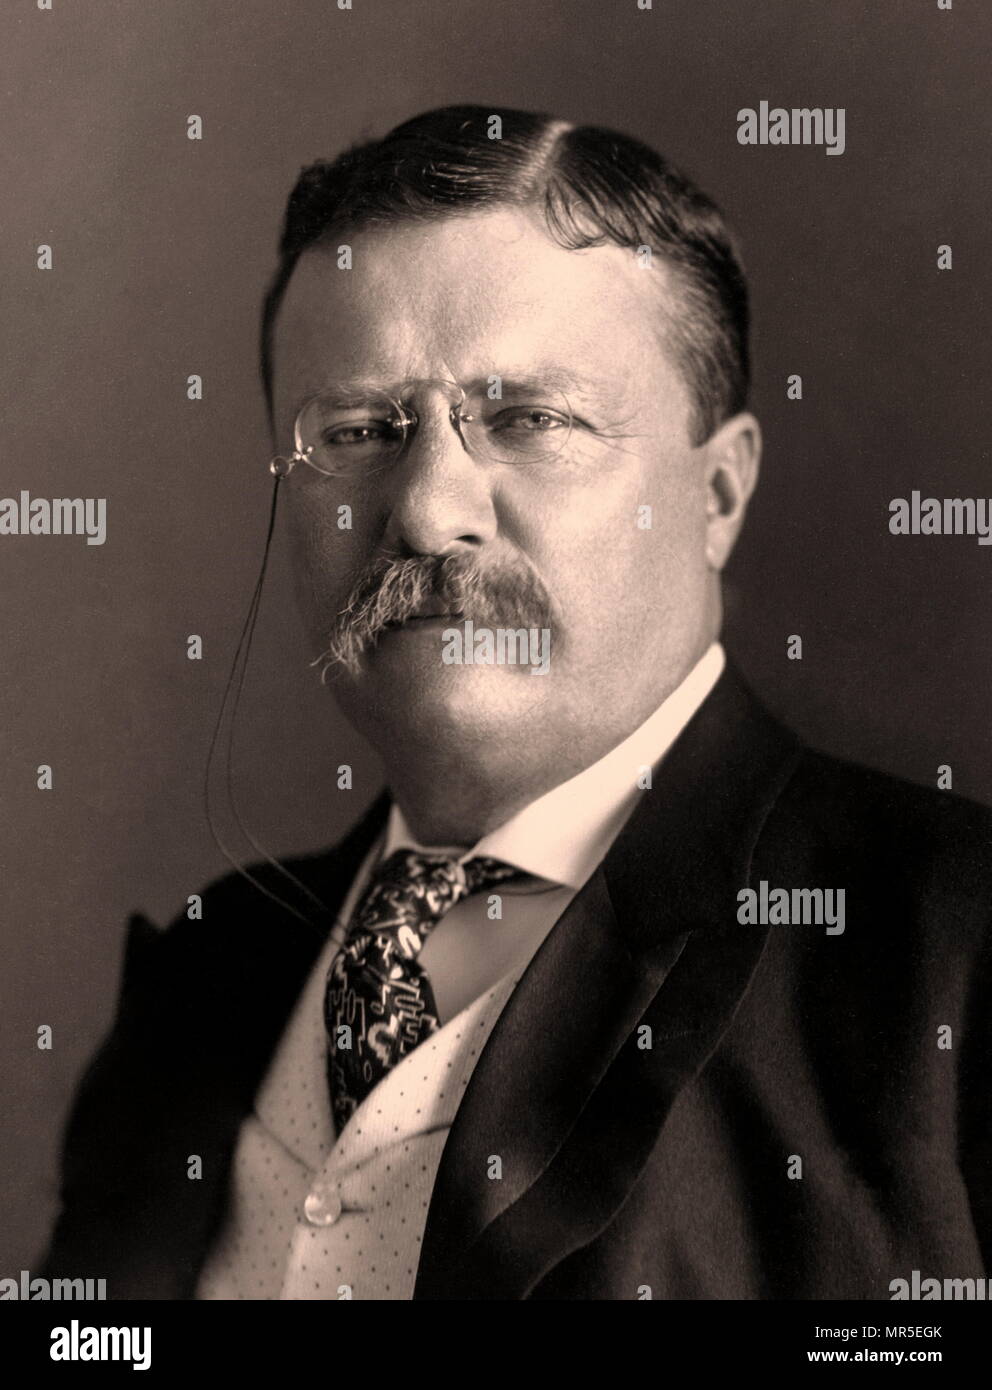 Theodore Roosevelt Jr. (1858 –1919) American statesman, author, explorer, soldier. 26th President of the United States from 1901 to 1909. He also served as the 25th Vice President of the United States and as the 33rd Governor of New York. Stock Photo